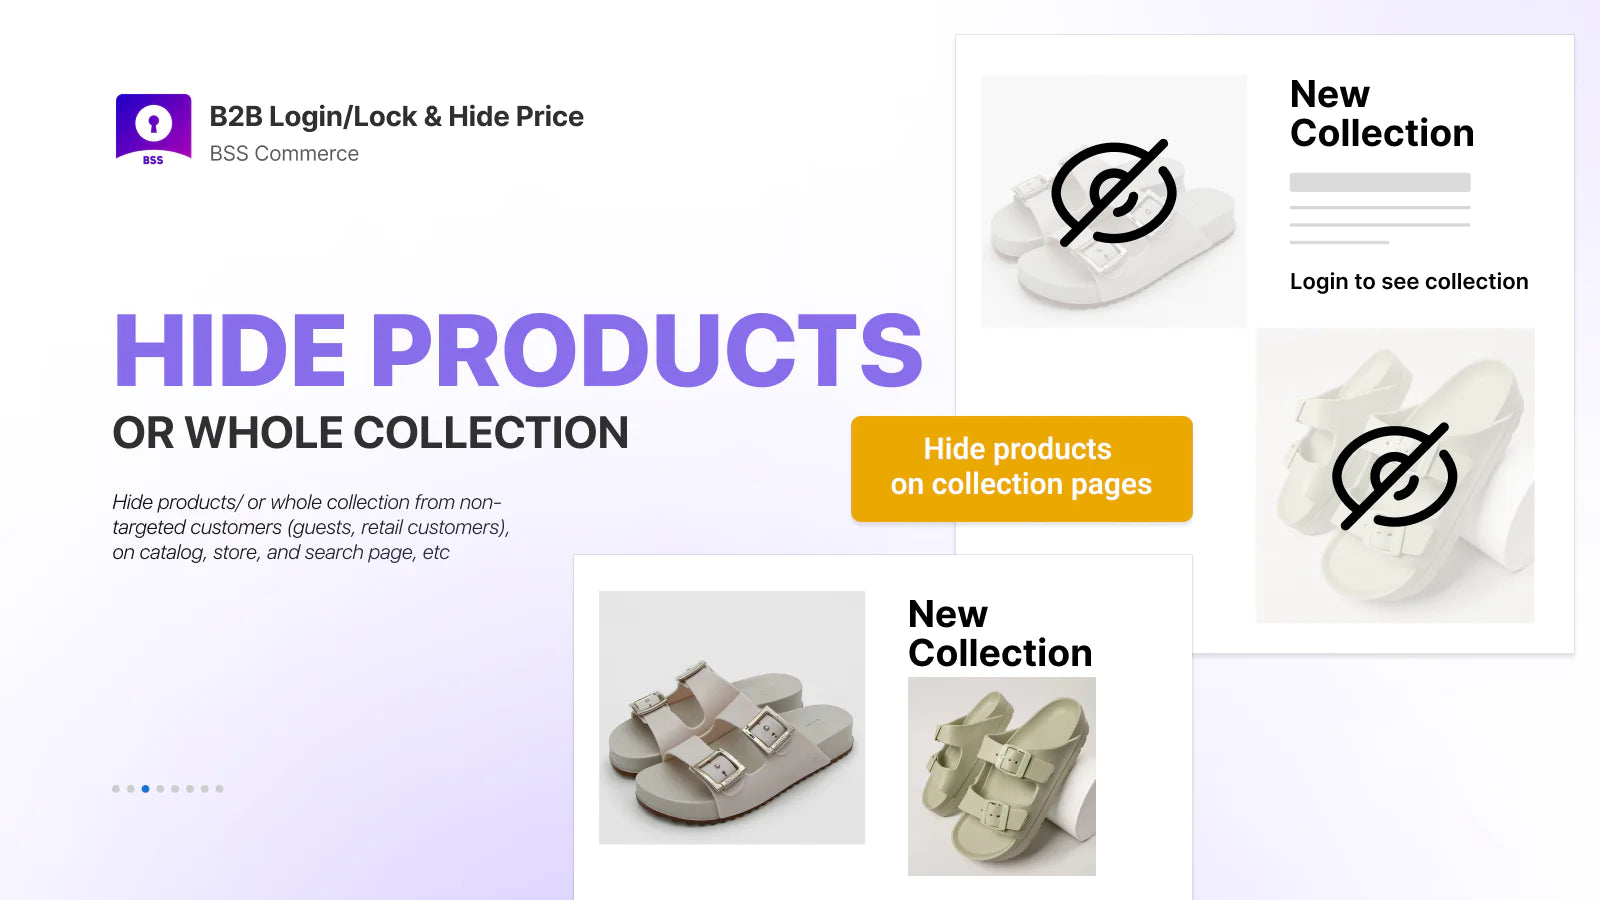 B2B Login/Lock & Hide Price and products on collection pages